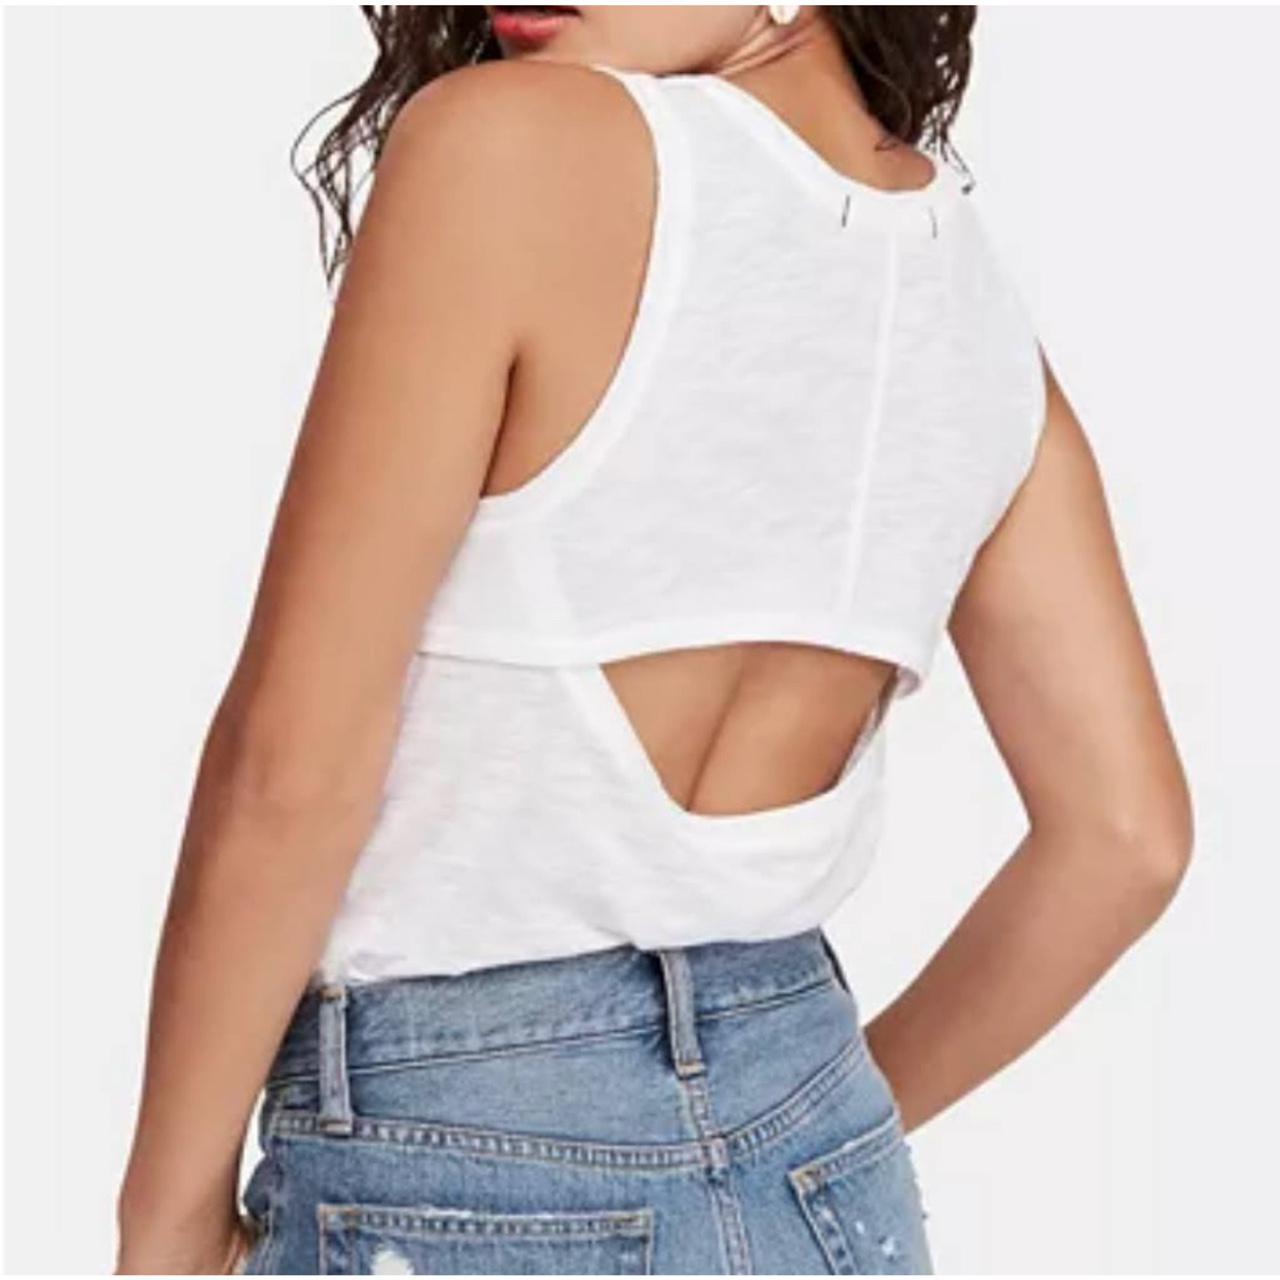 Free People Women's White and Blue Vests-tanks-camis (4)